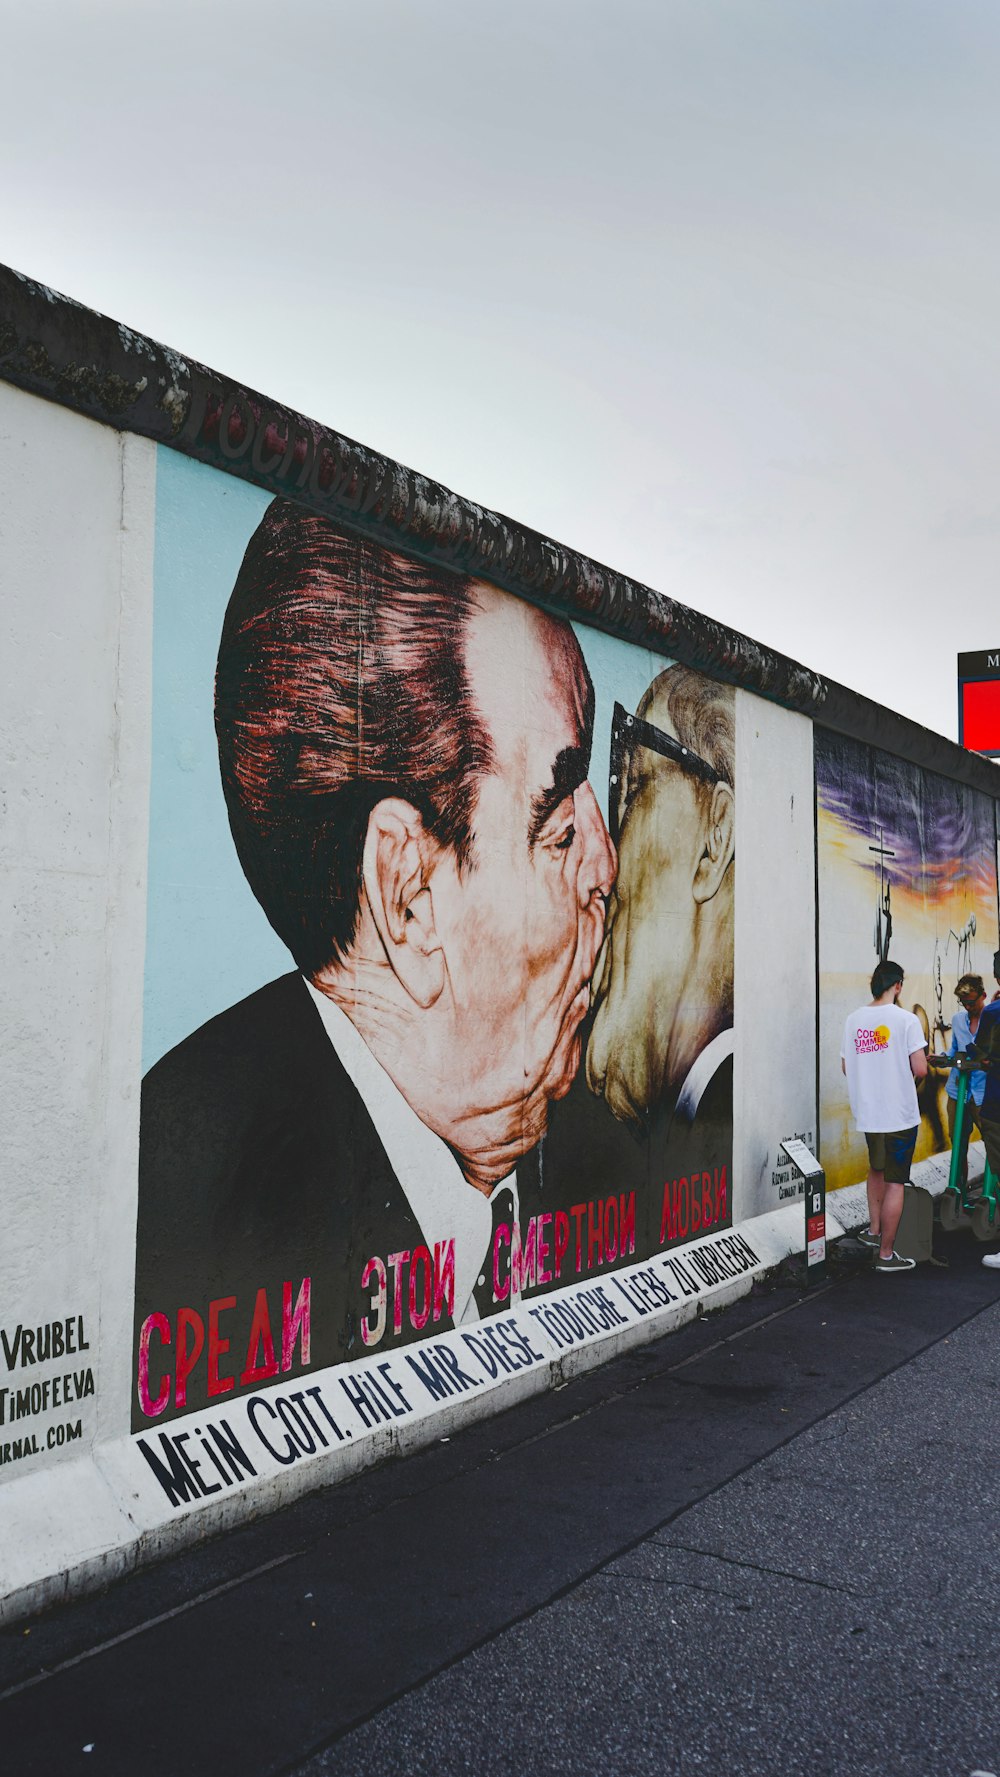 a large mural of a man kissing a woman